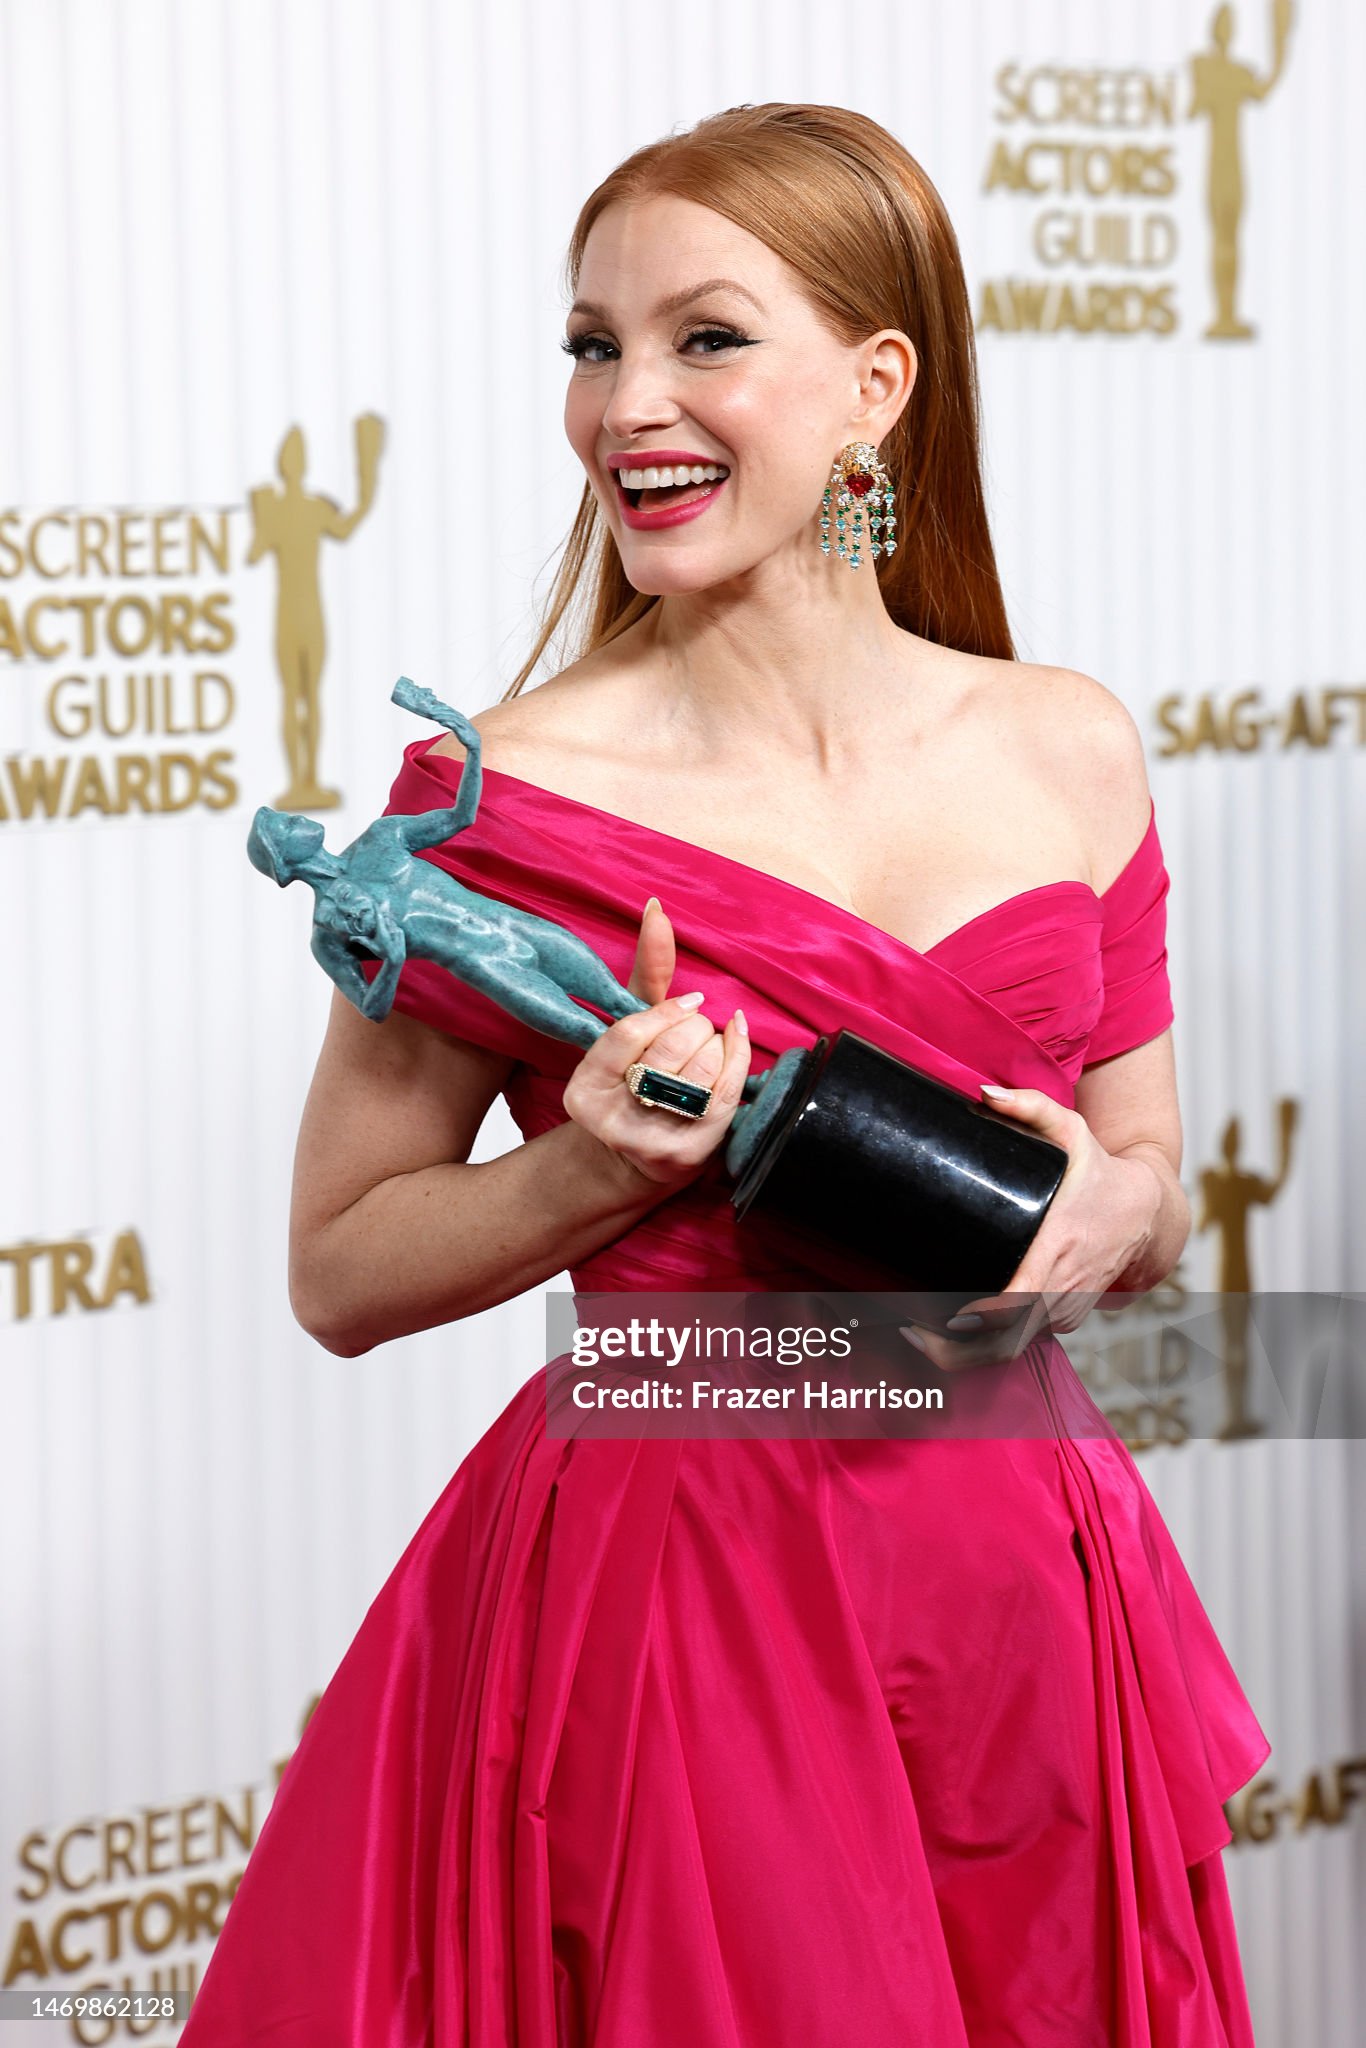 jessica-chastain-recipient-of-the-female-actor-in-a-television-movie-or-limited-series-award.jpg